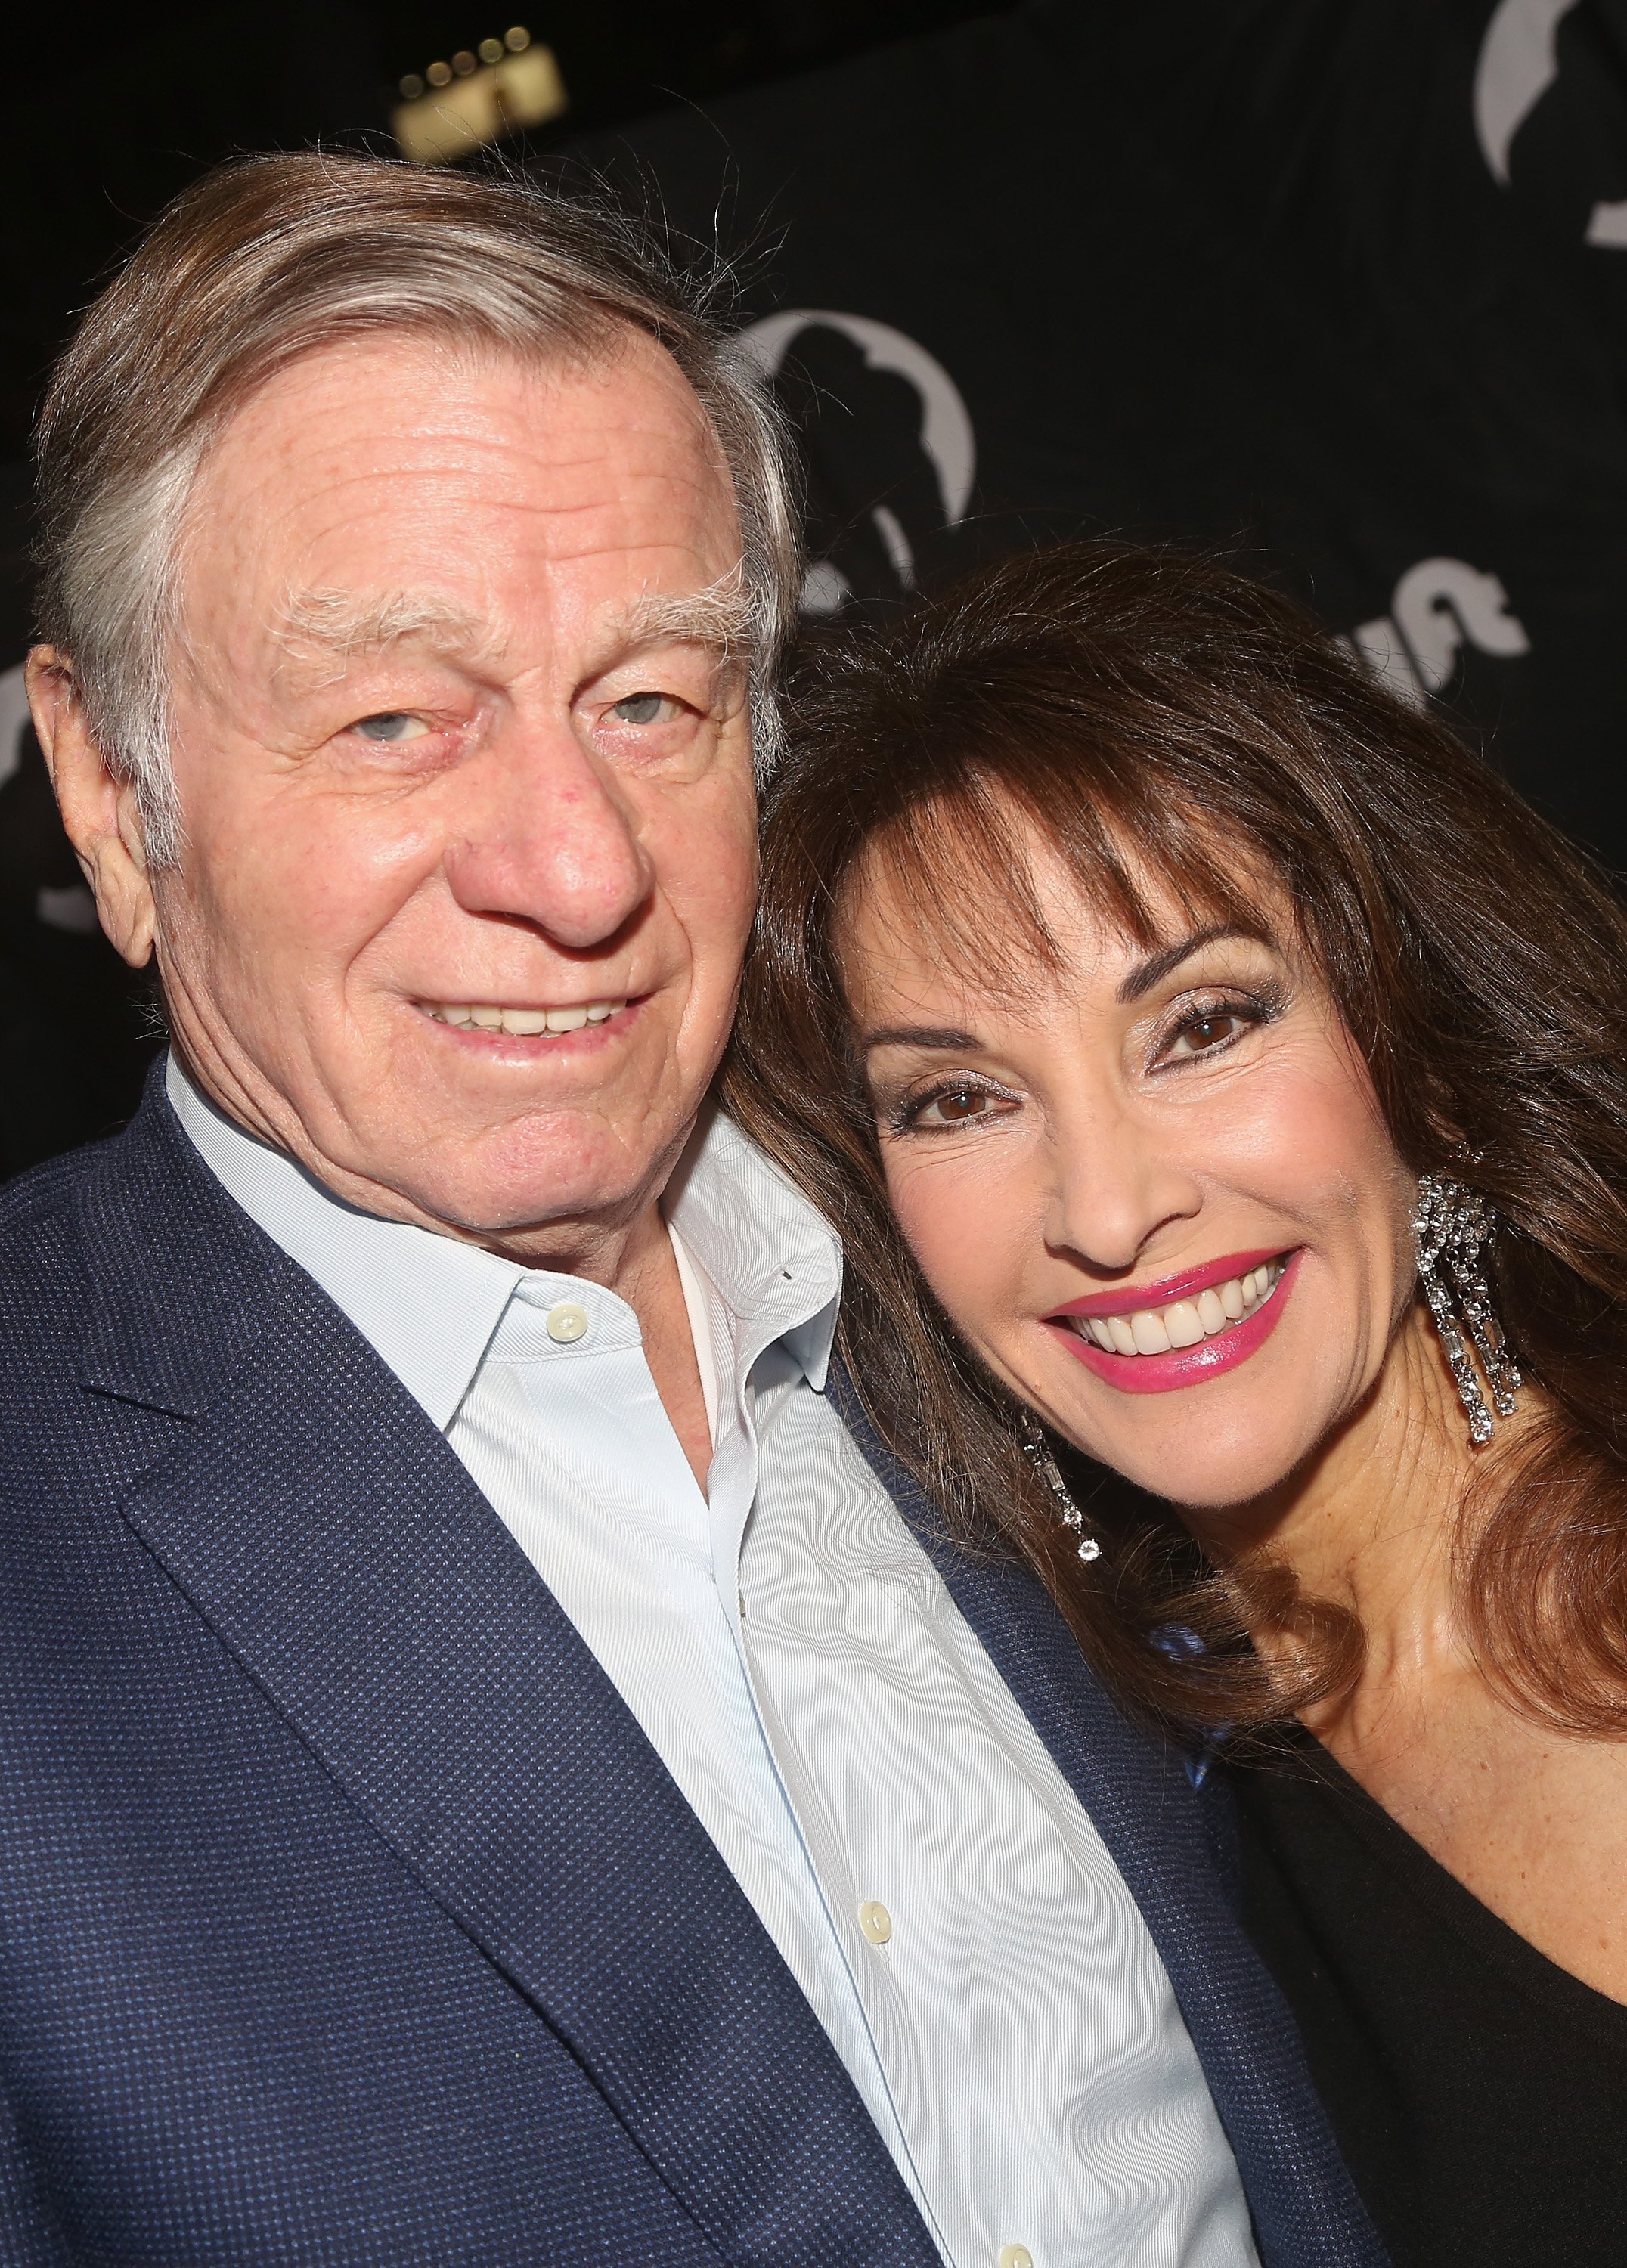 Helmut Huber and Susan Lucci pose at the opening night of "King Kong" on Broadway at The Broadway Theatre on November 8, 2018, in New York City. | Source: Getty Images